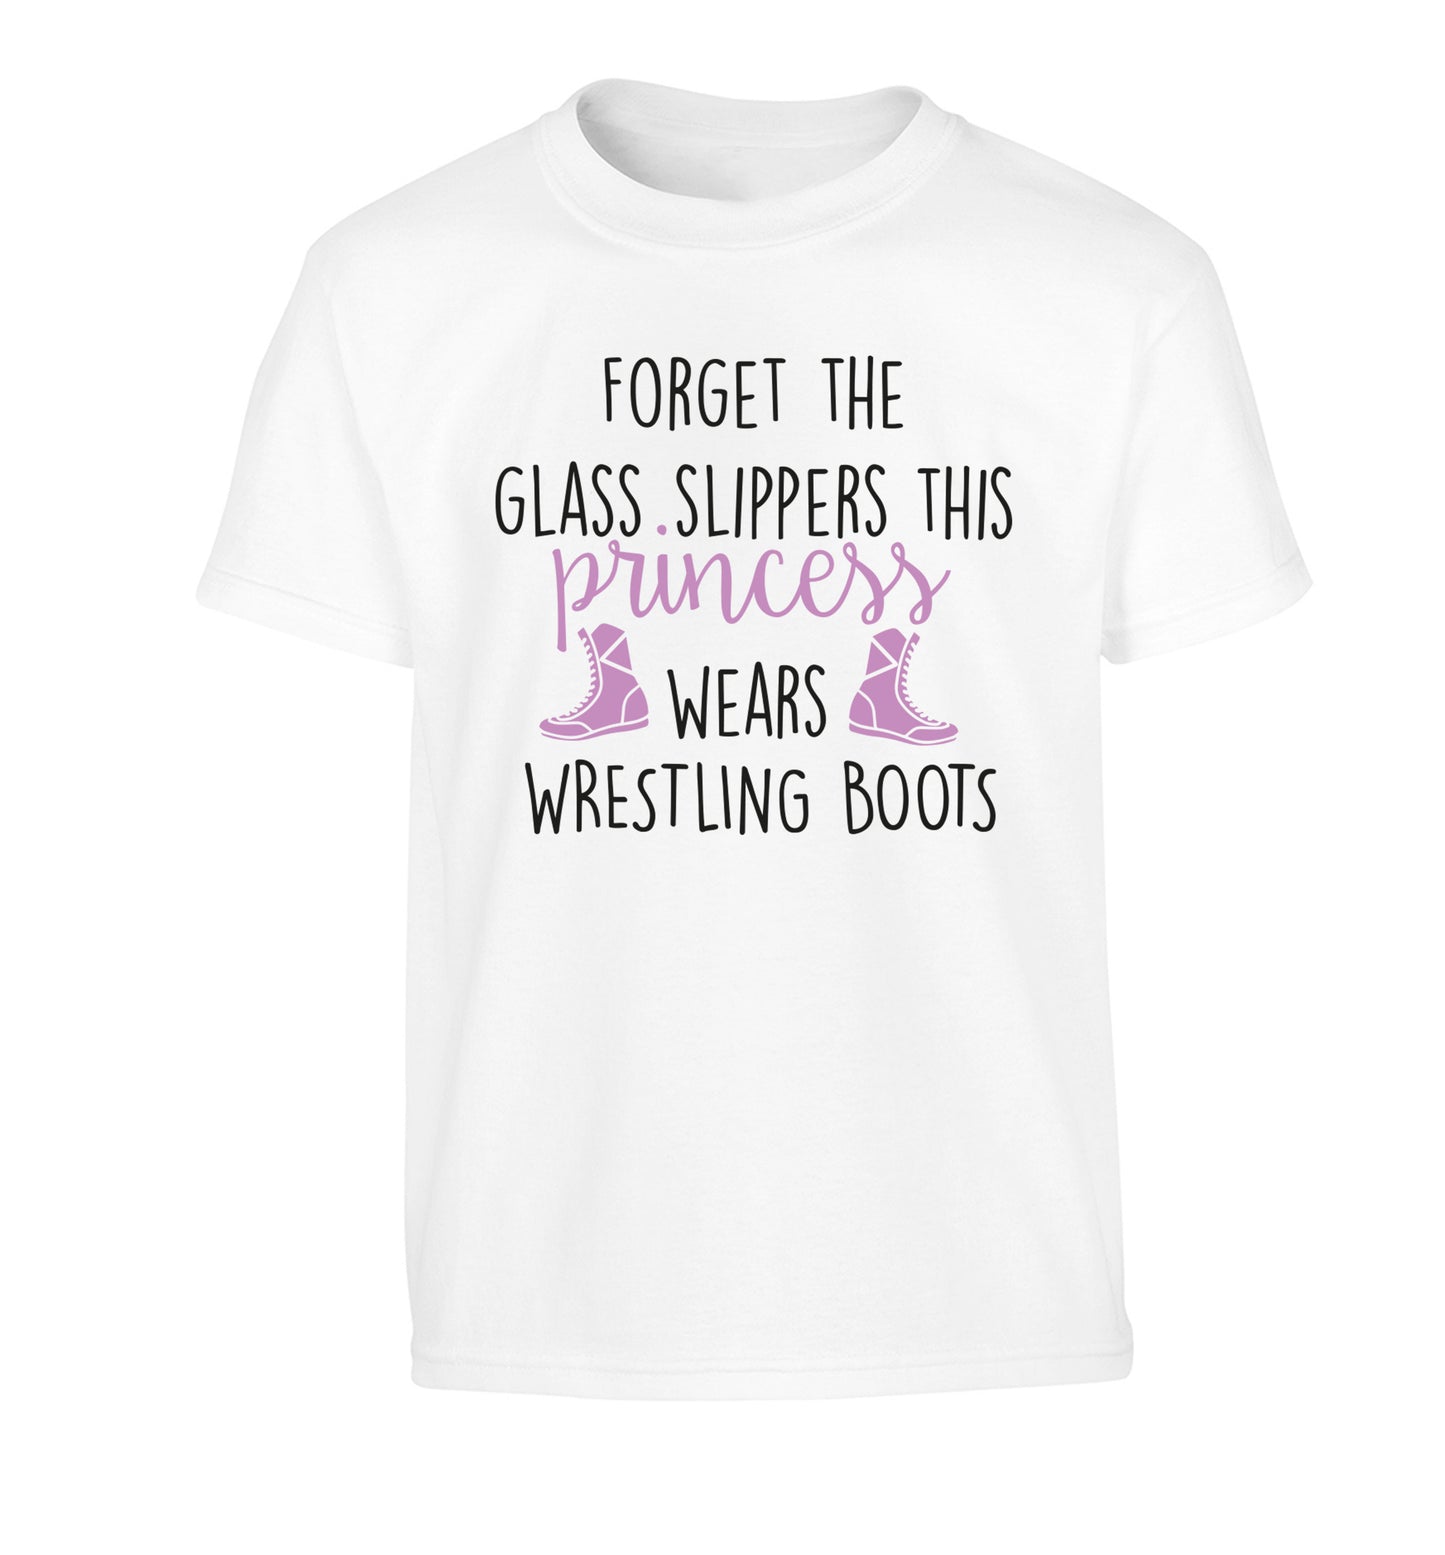 Forget the glass slippers this princess wears wrestling boots Children's white Tshirt 12-14 Years